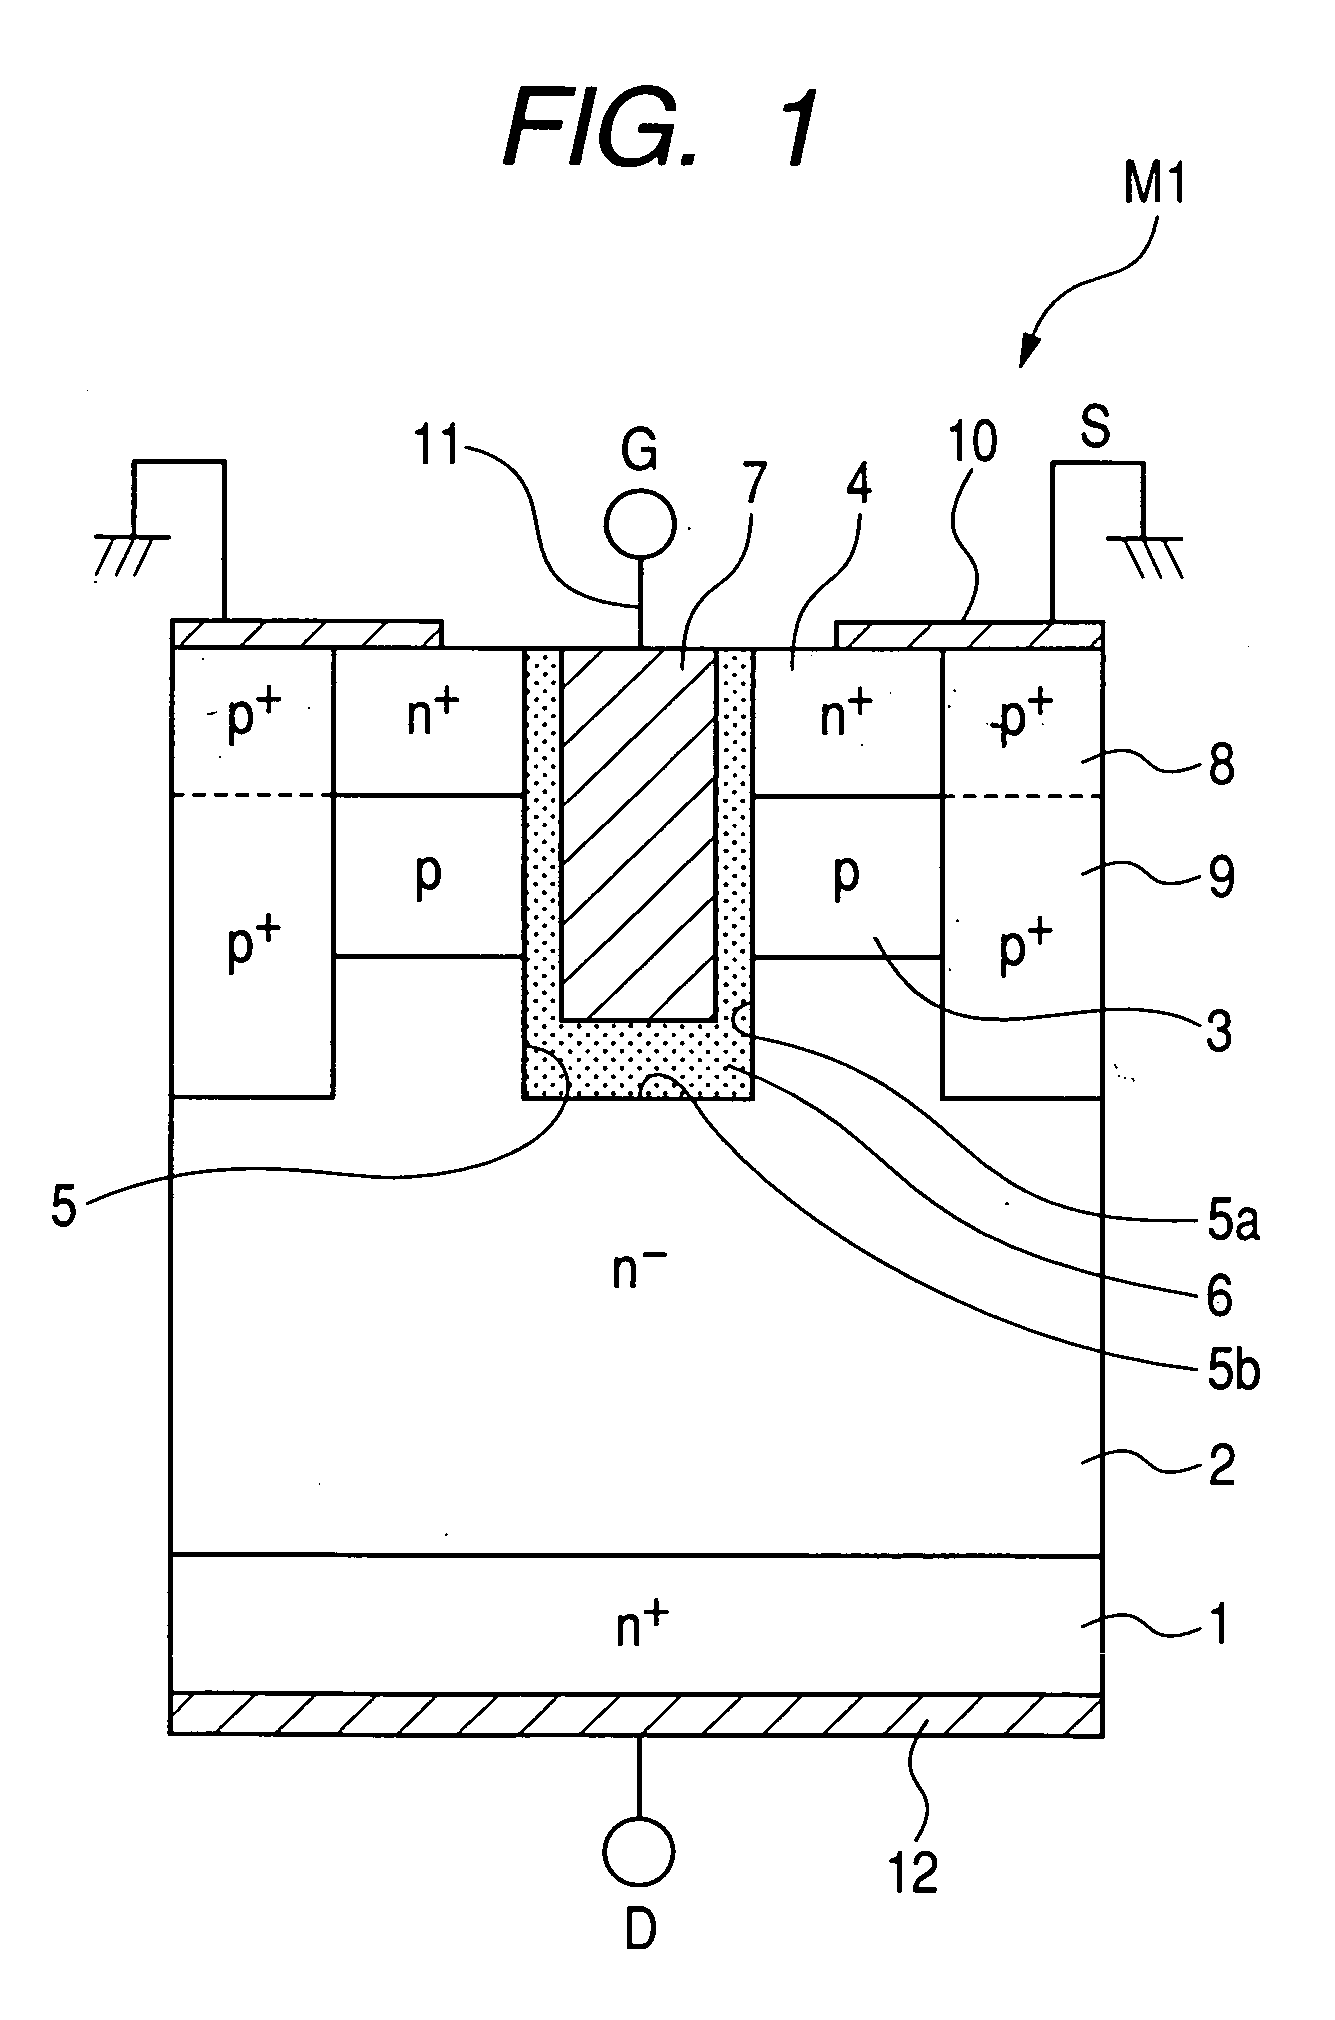 Silicon carbide semiconductor device and related manufacturing method